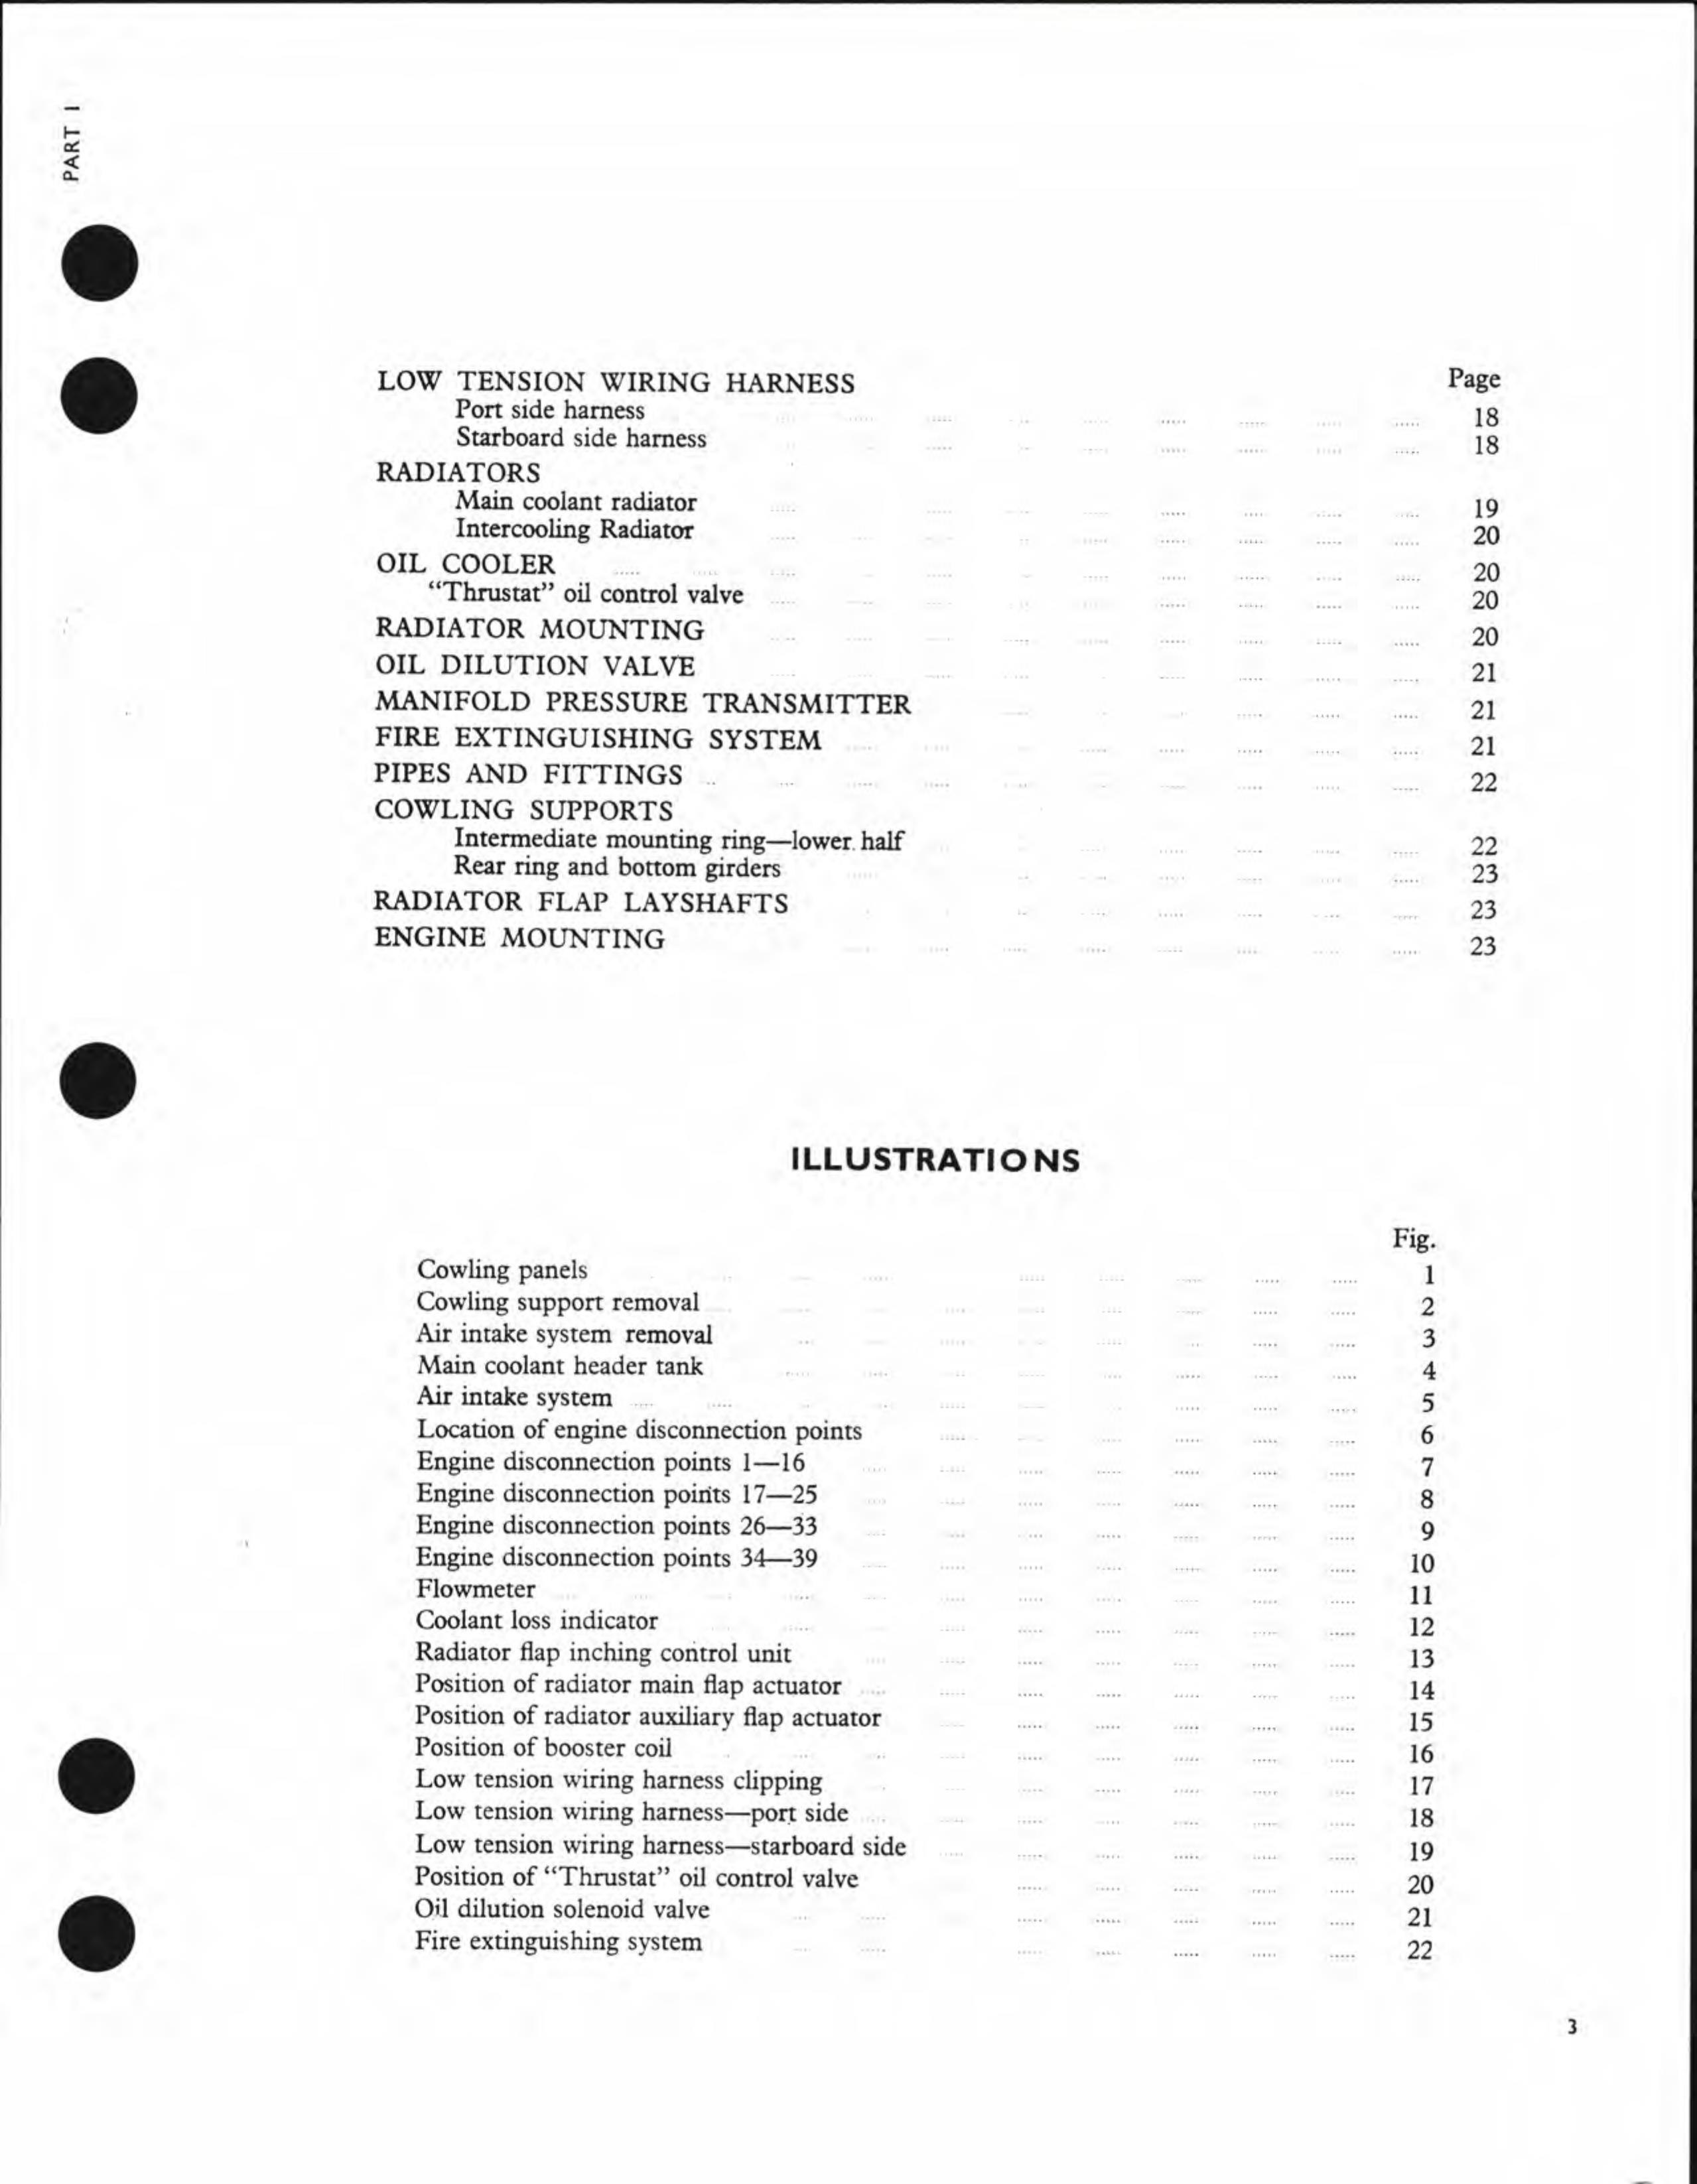 Sample page 15 from AirCorps Library document: Overhaul Manual for Merlin 620 Engine